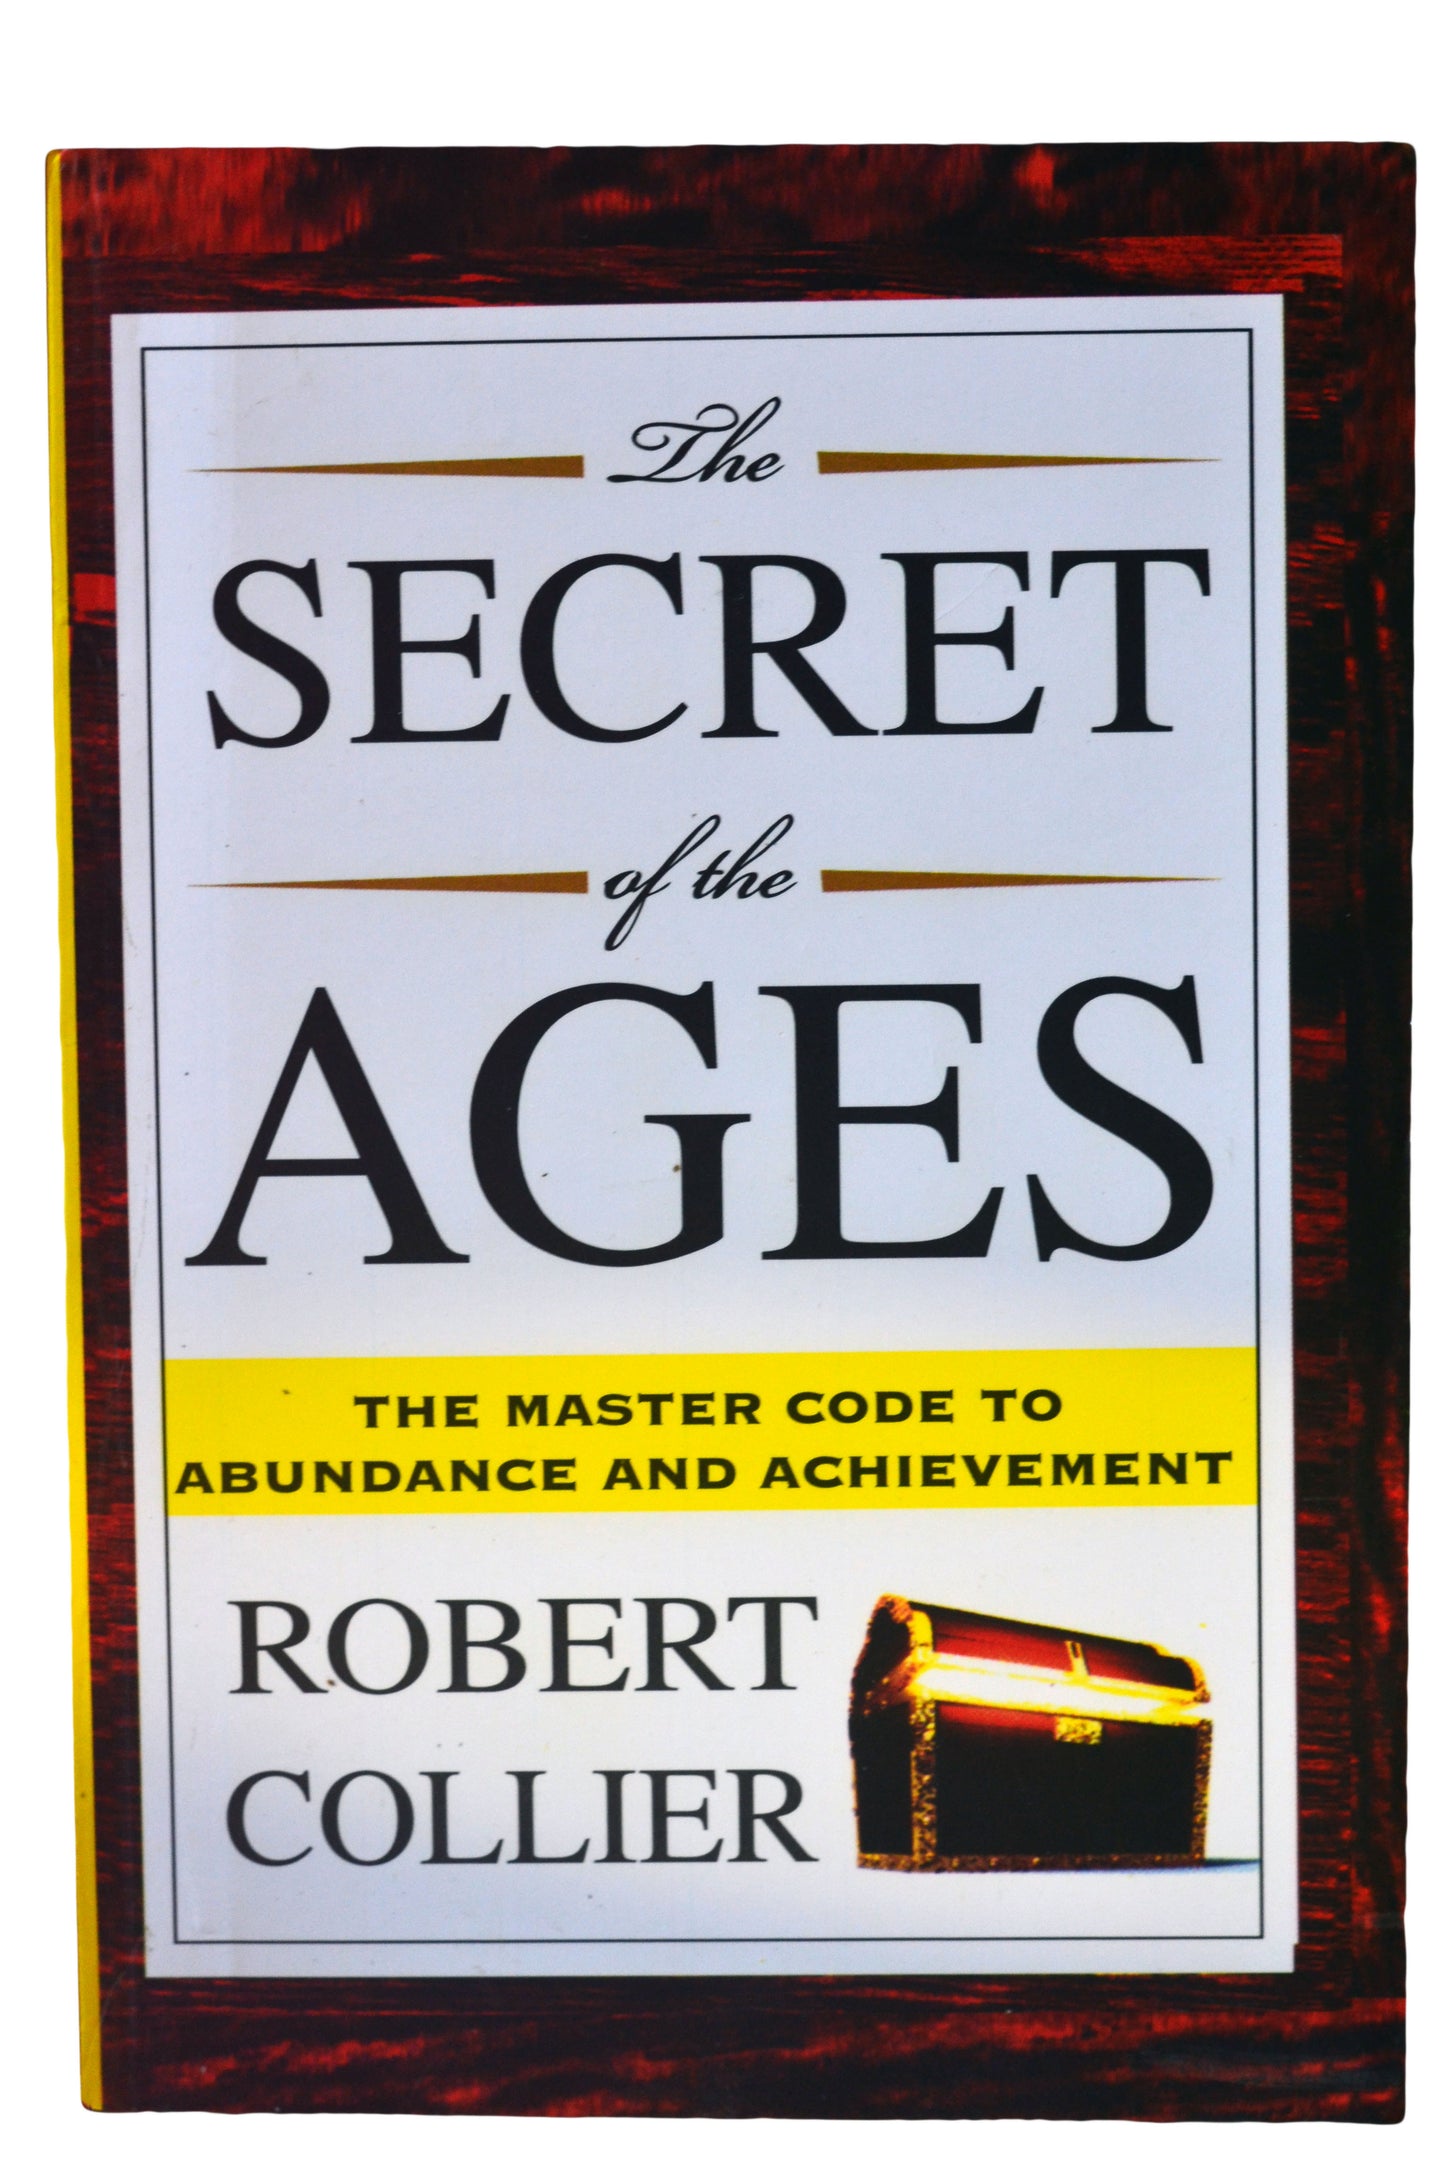 THE SECRET OF THE AGES by Robert Collier